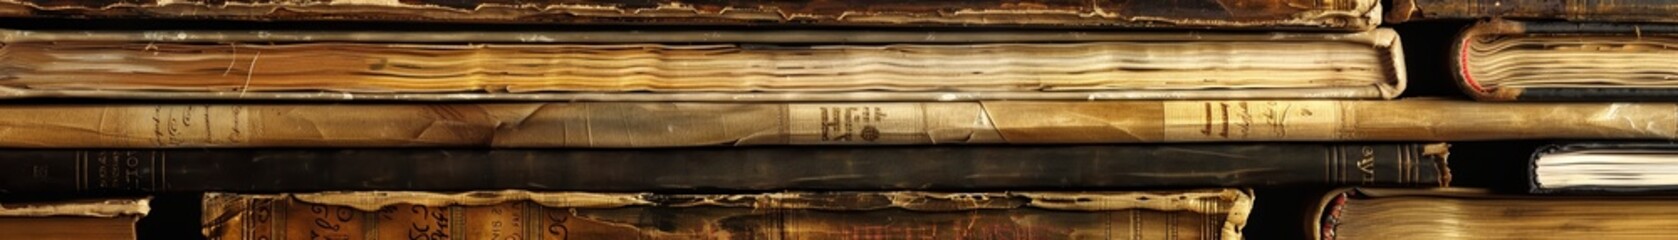 A stack of old books close up on pages and bindings warm lighting